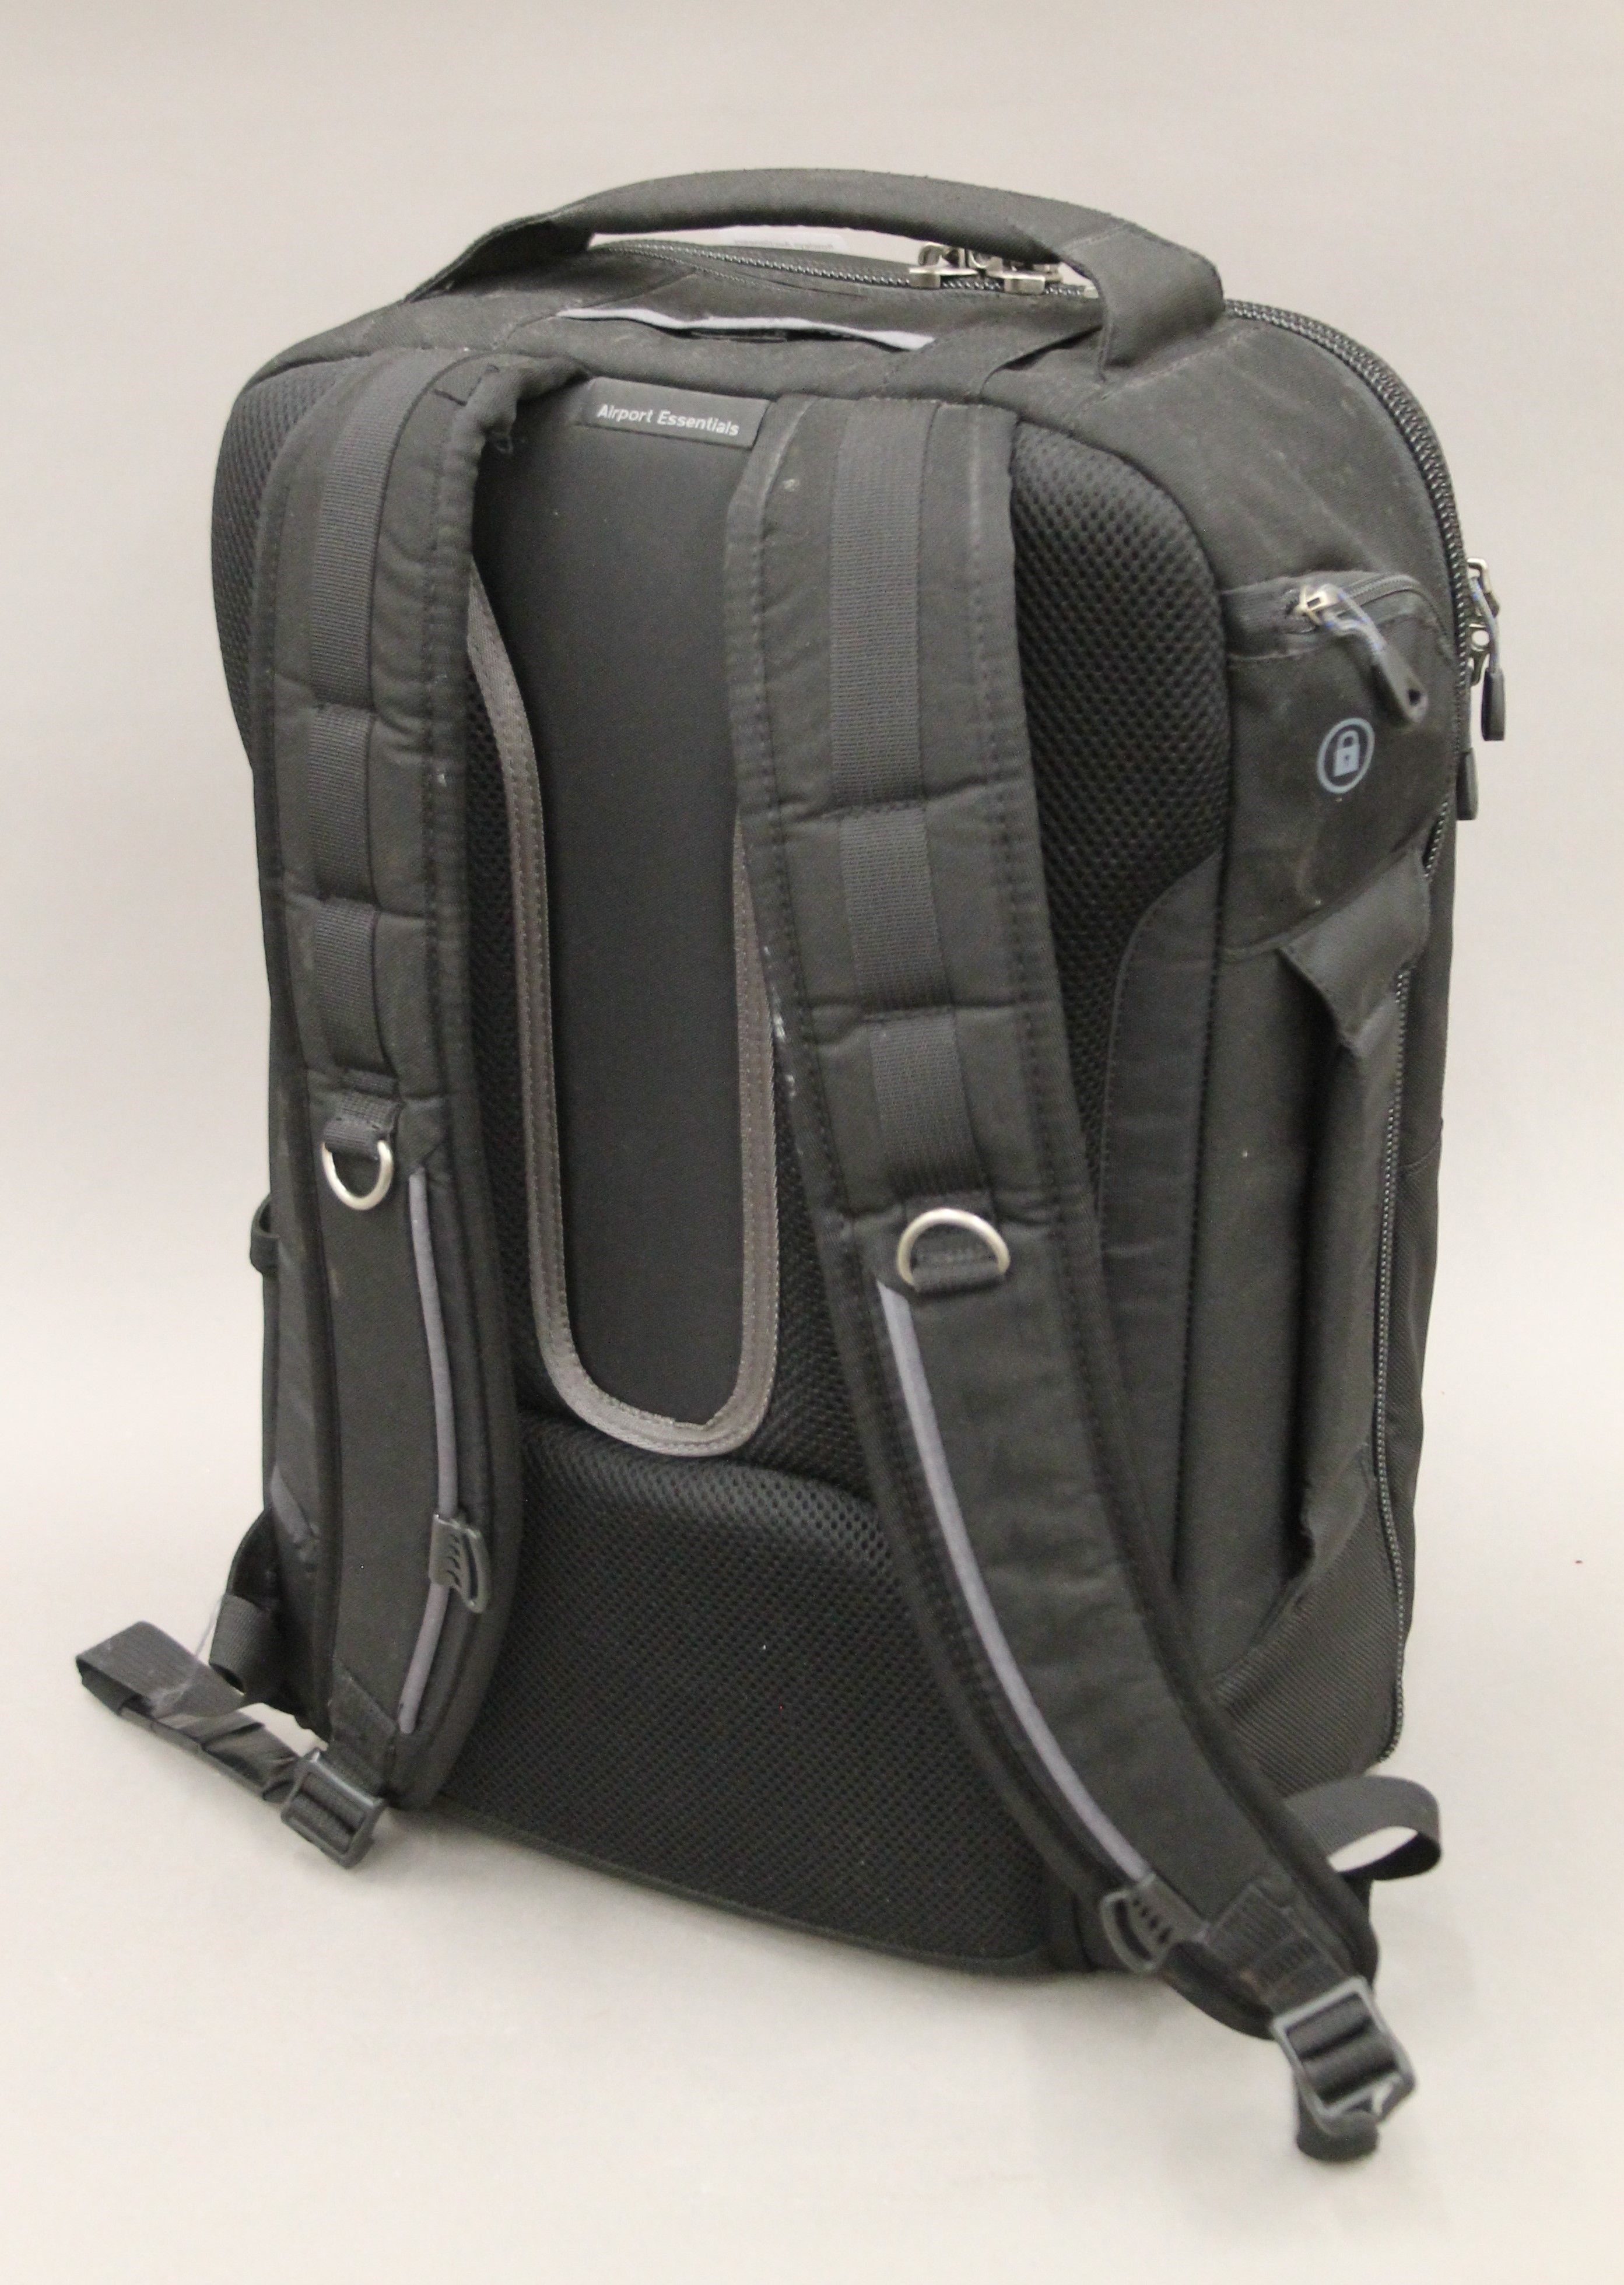 A quantity of Nikon camera equipment etc. in a carrying case. The case 46 cm high. - Image 14 of 14